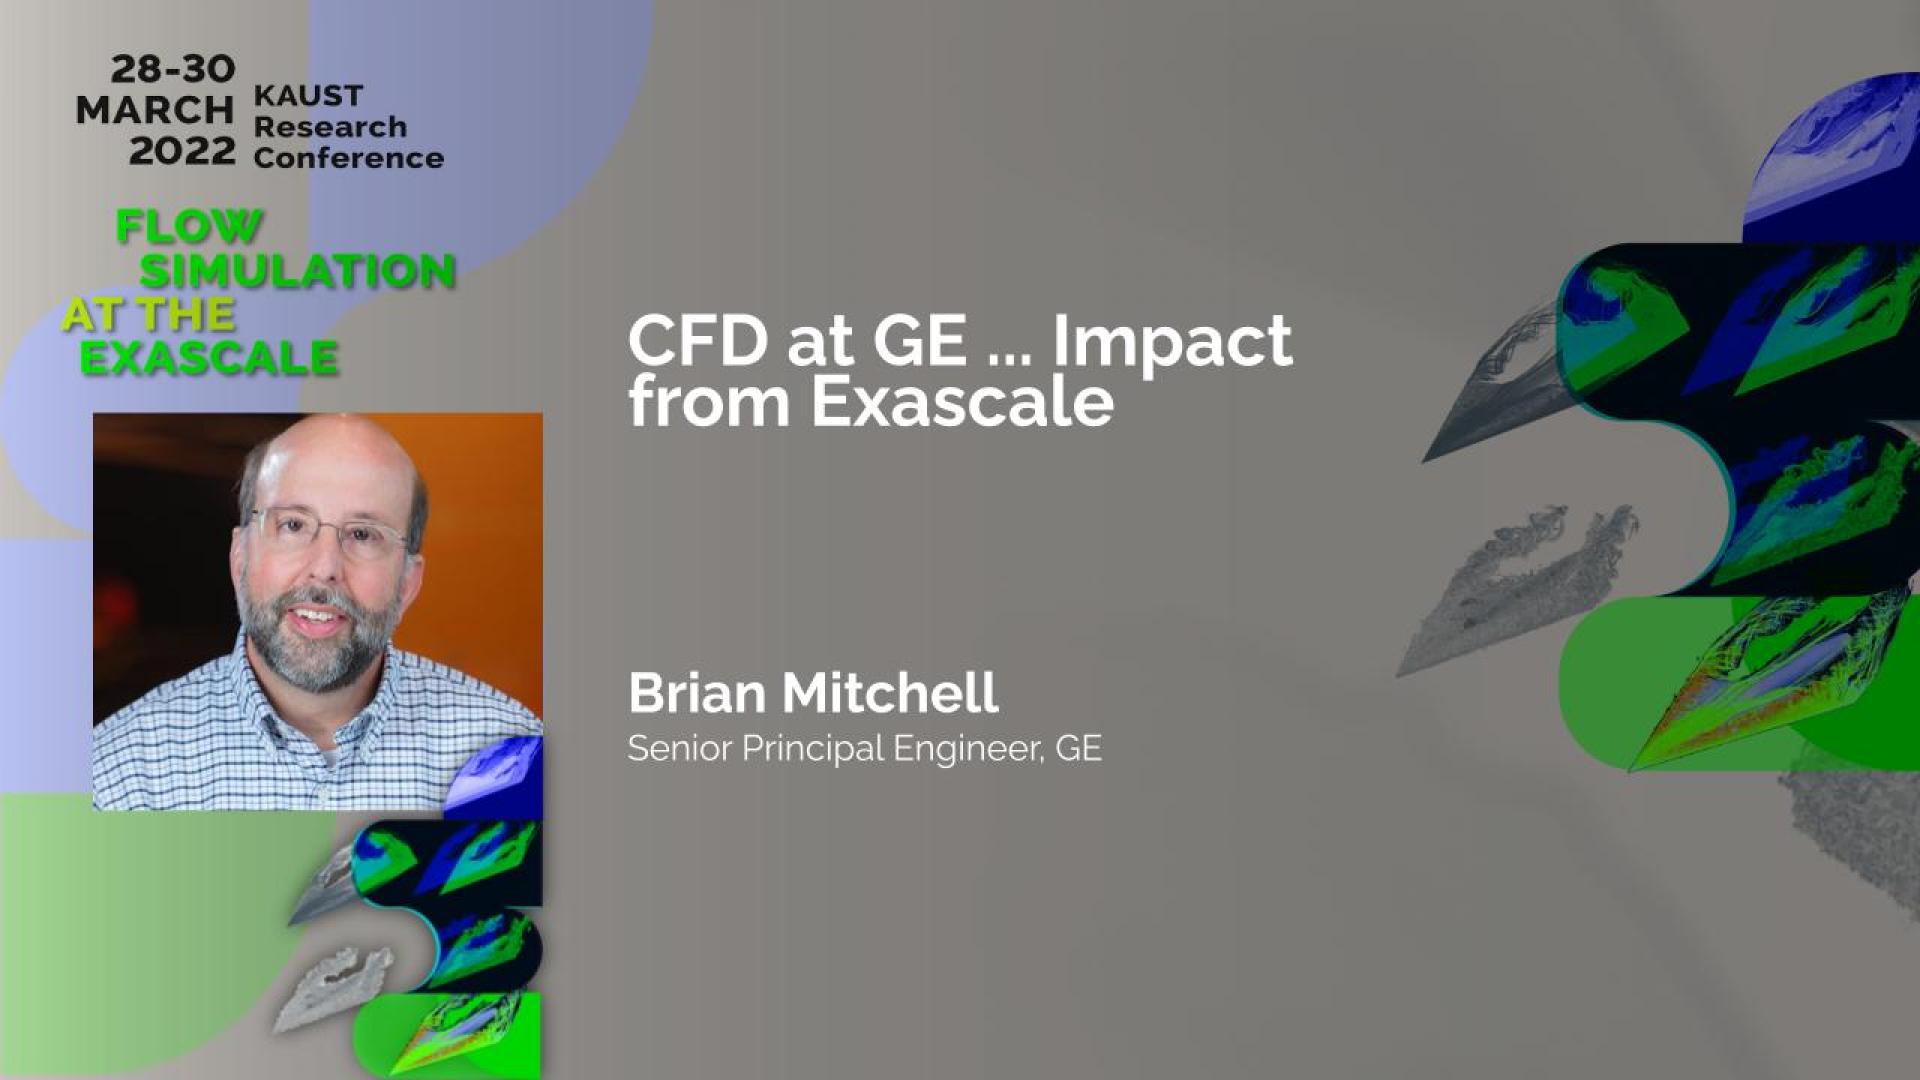 CFD at GE ... Impact from Exascale brian mitchell CEMSE KAUST EXAFLOW